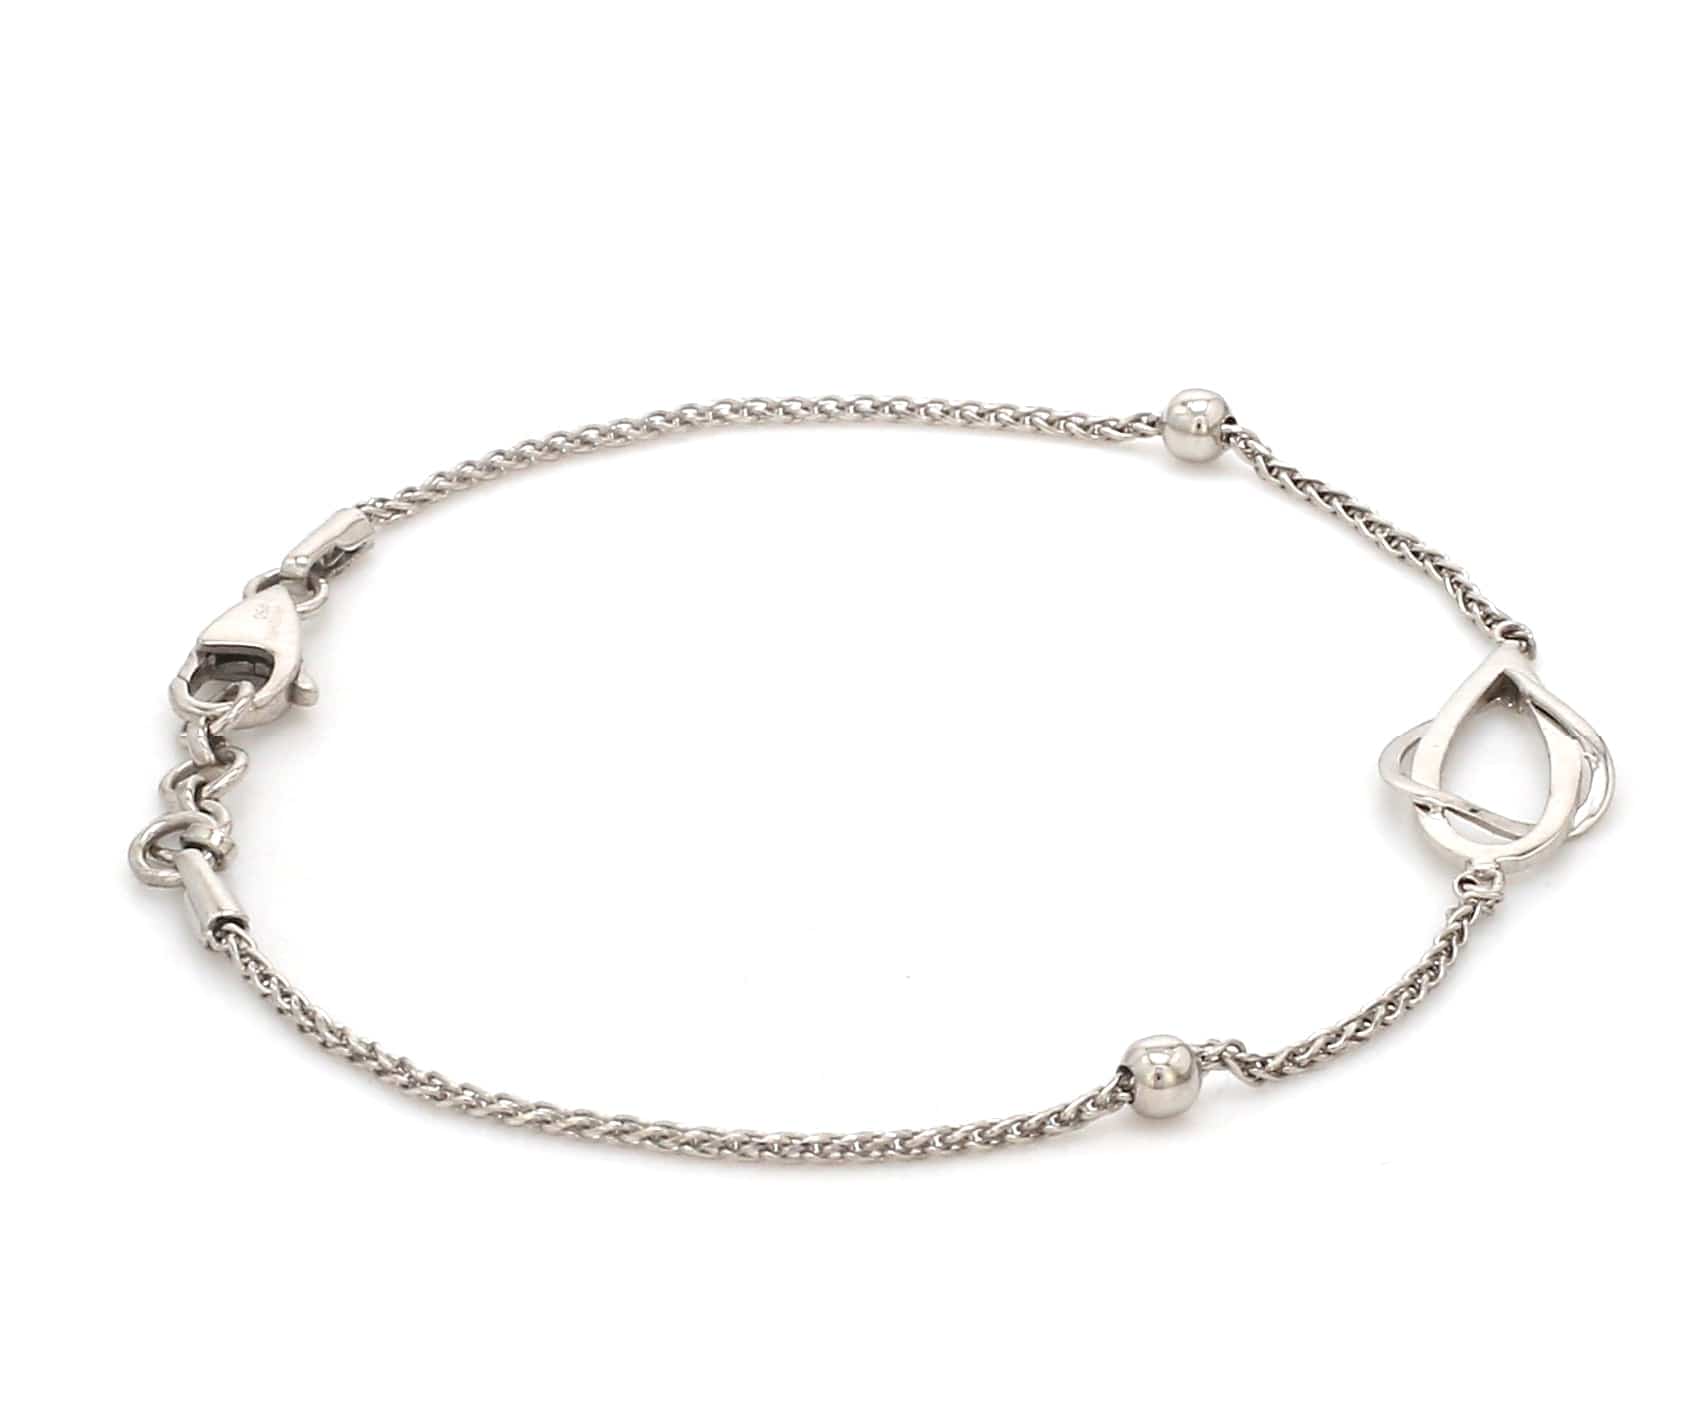 Top 5 Lightweight Gold Bracelets to own this Autumn! #Buyer'sGuide - Melorra